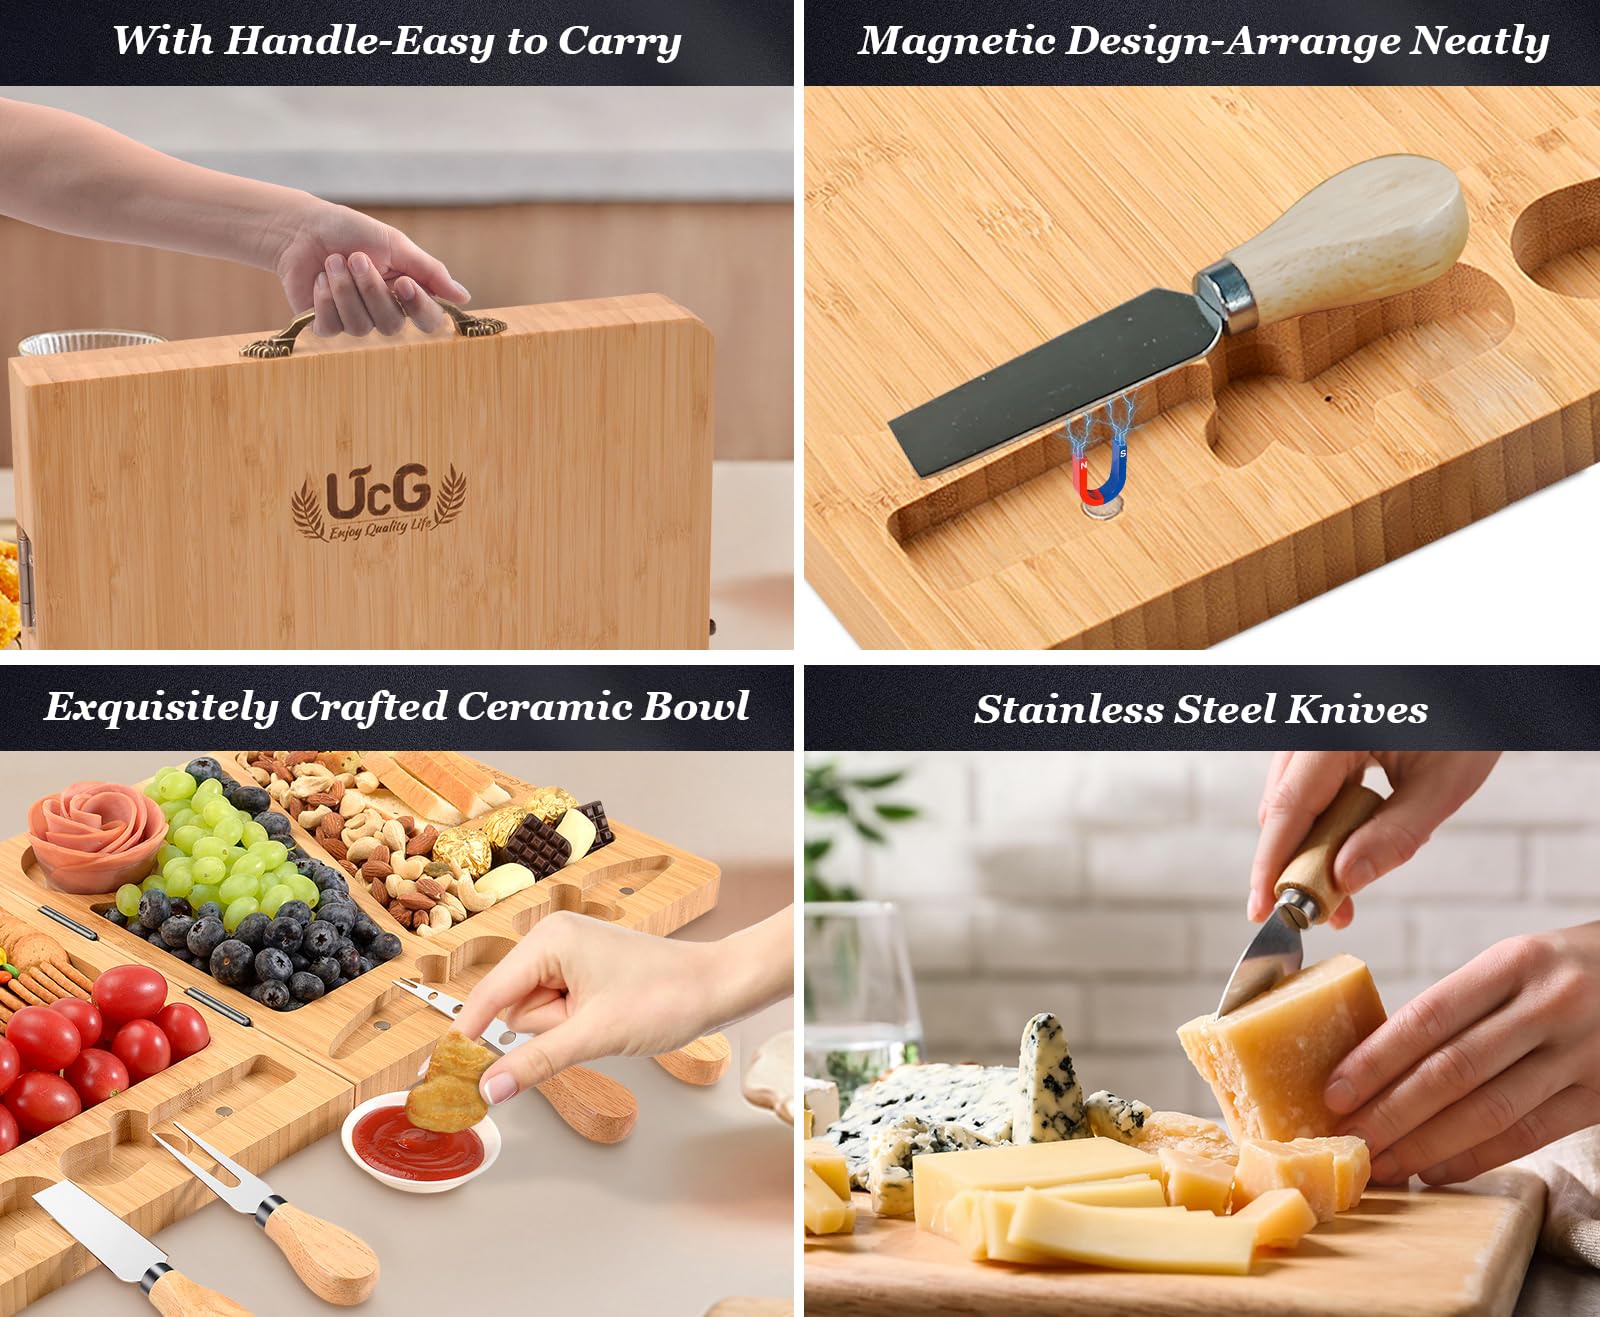 Cheese Board Charcuterie Gift Folding - Bamboo Sturdy Easy to Storage Magnetic Mount Serving Platter with Knife Travel Picnic Cheese Tray Set Christmas Housewarming Wedding Birthday Party Gift UTCG U1